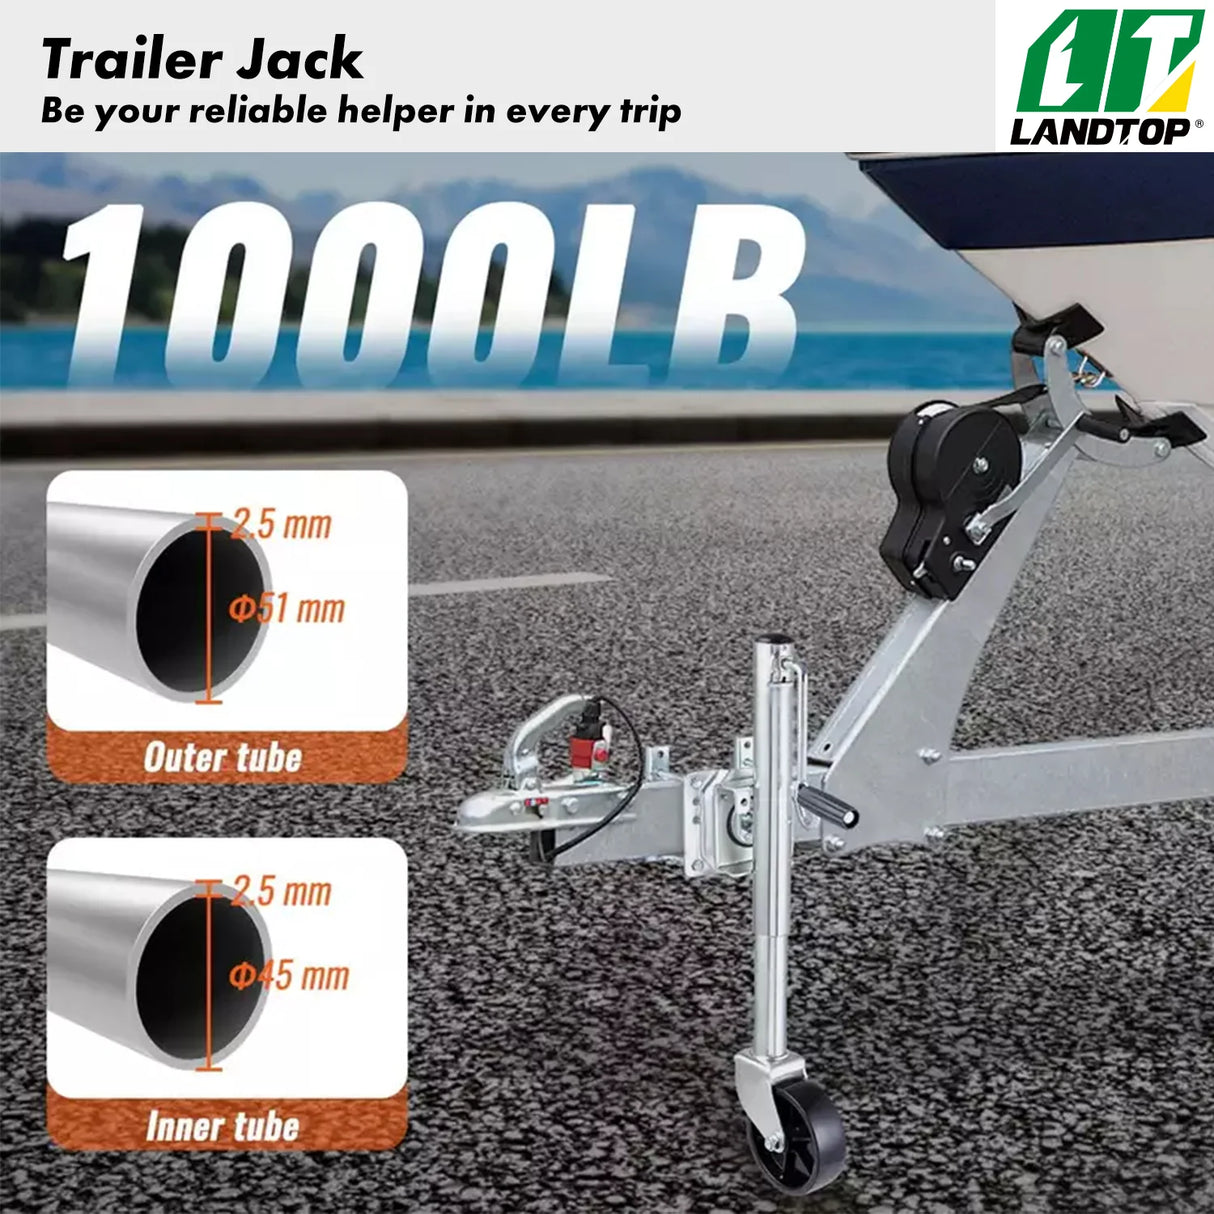 Trailer Jack Boat Trailer Jack 32.8 in 1000 lbs with PP Wheel & Handle